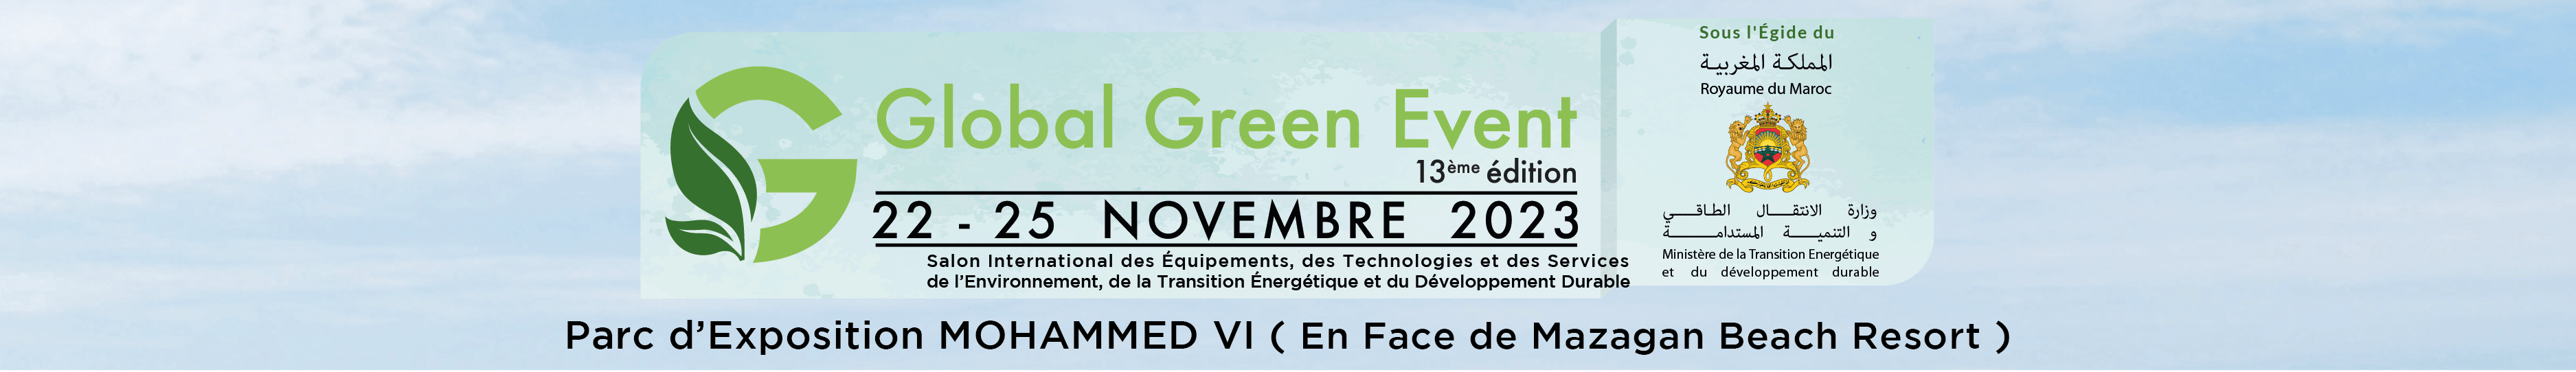 Global Green Event